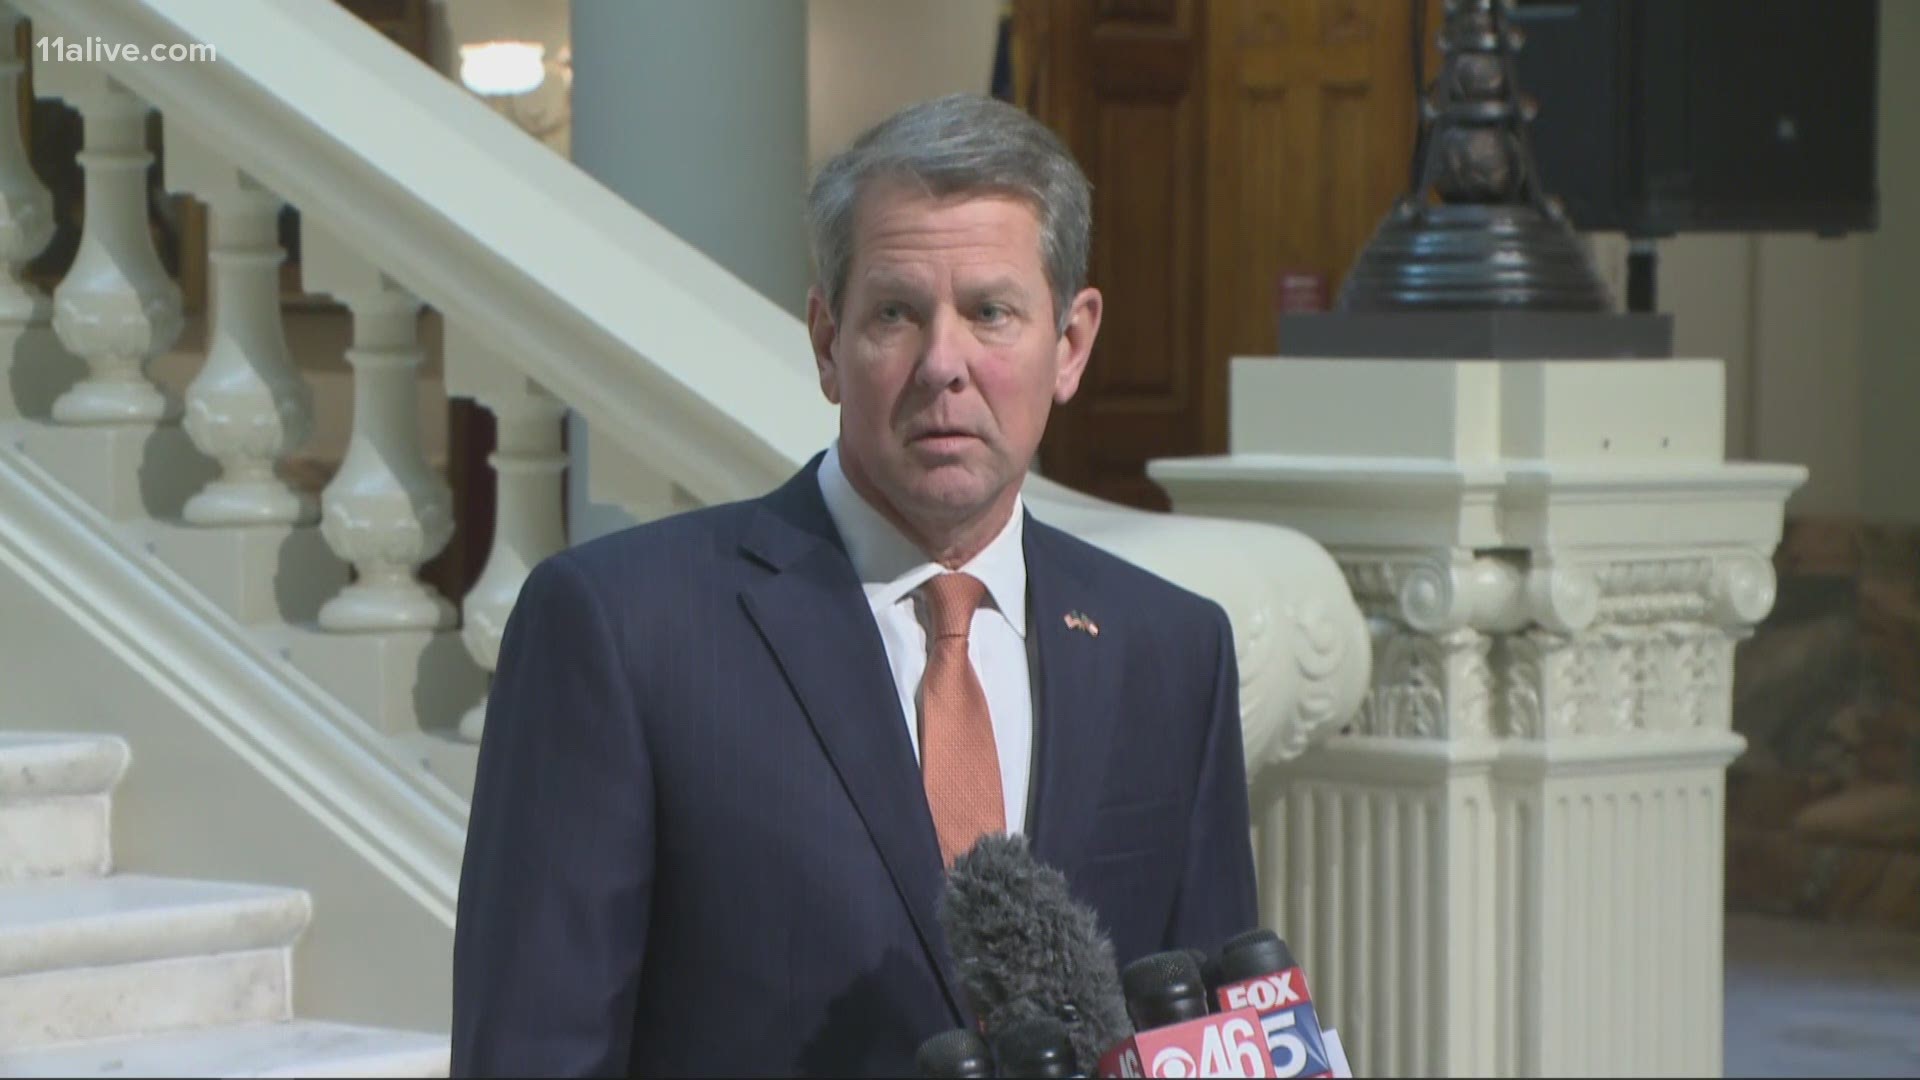 Gov. Brian Kemp spoke to members of the media in an afternoon press conference on Wednesday.